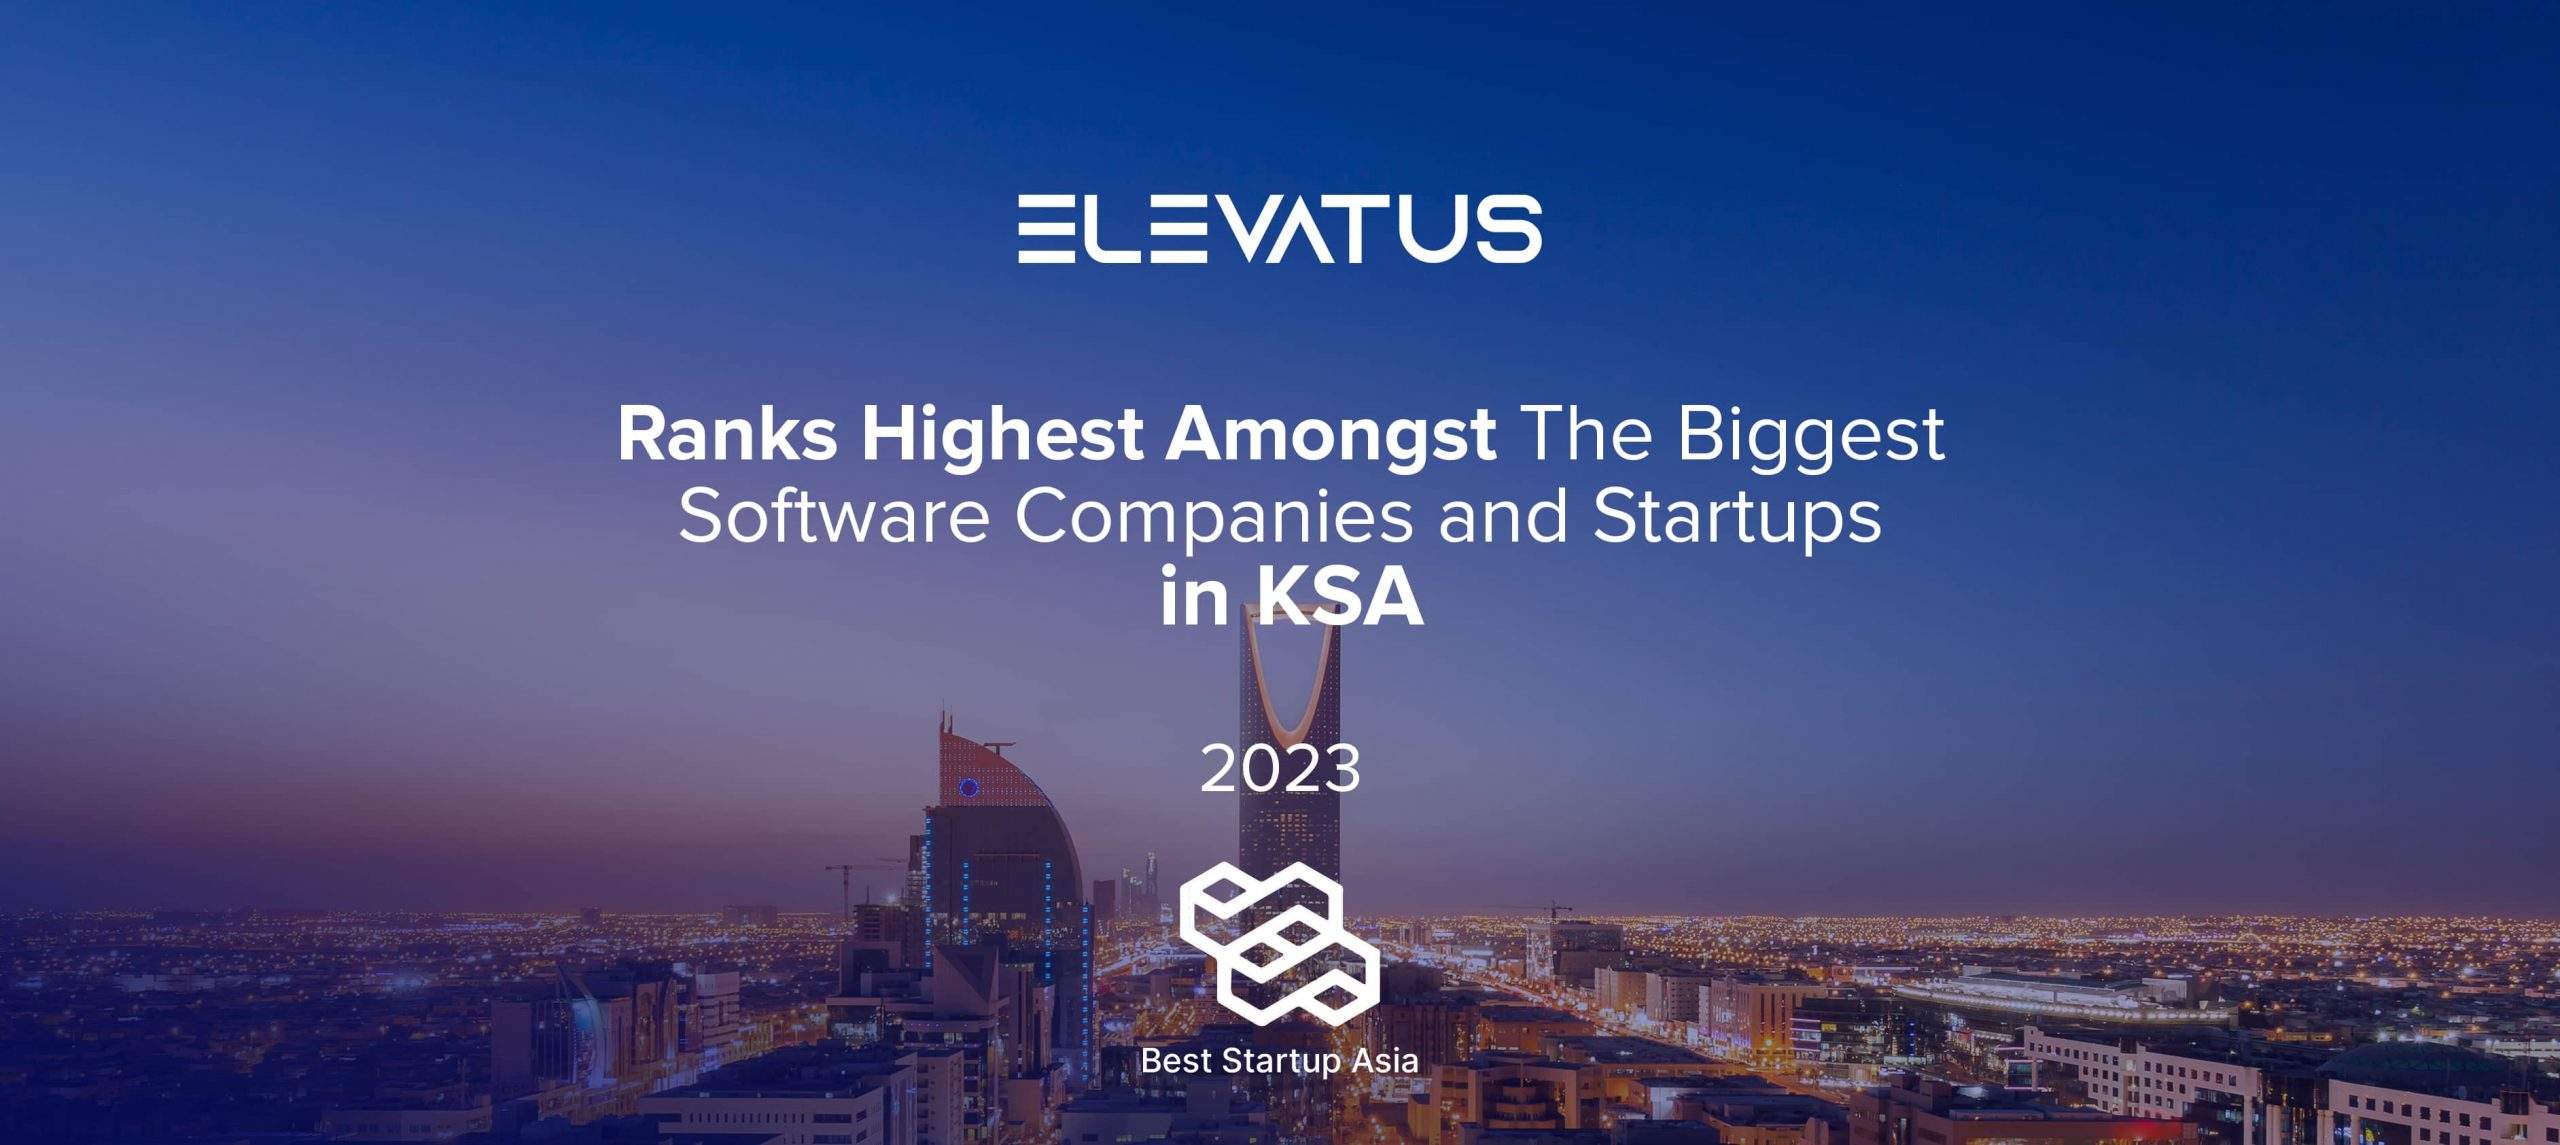 Elevatus listed in the top 101 Riyadh Software Companies